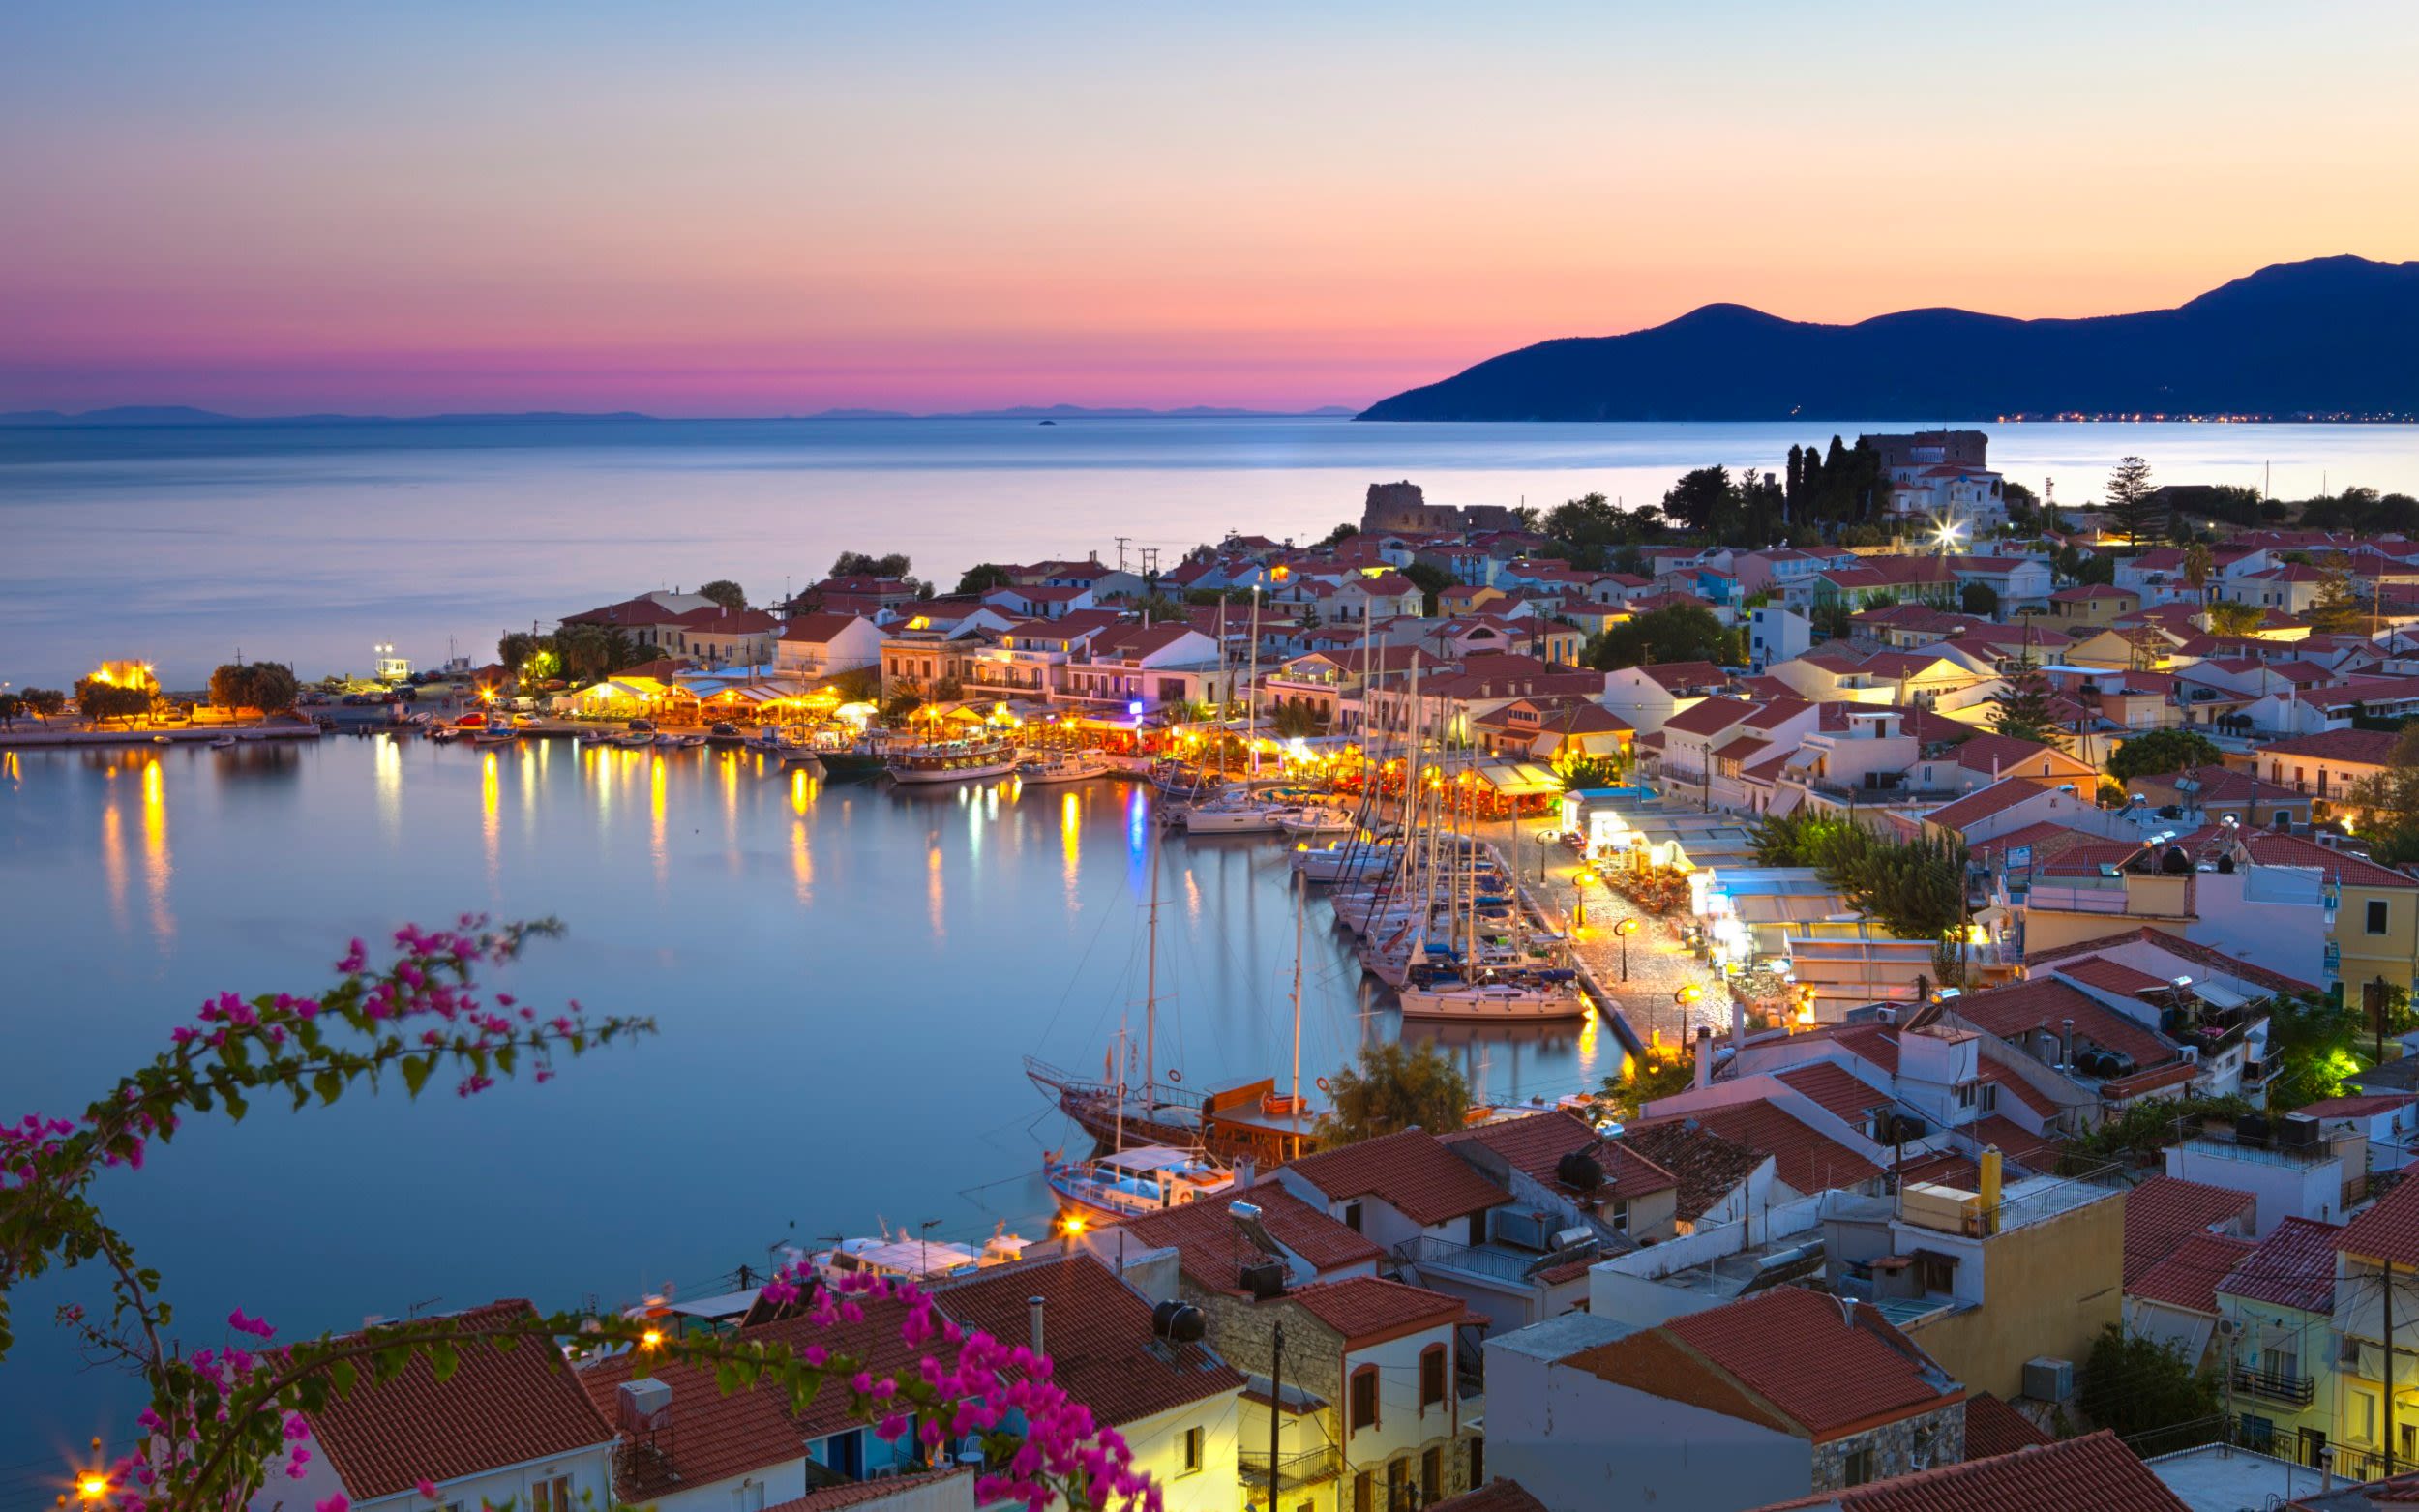 Turks are choosing Greece this summer – here’s why you should too